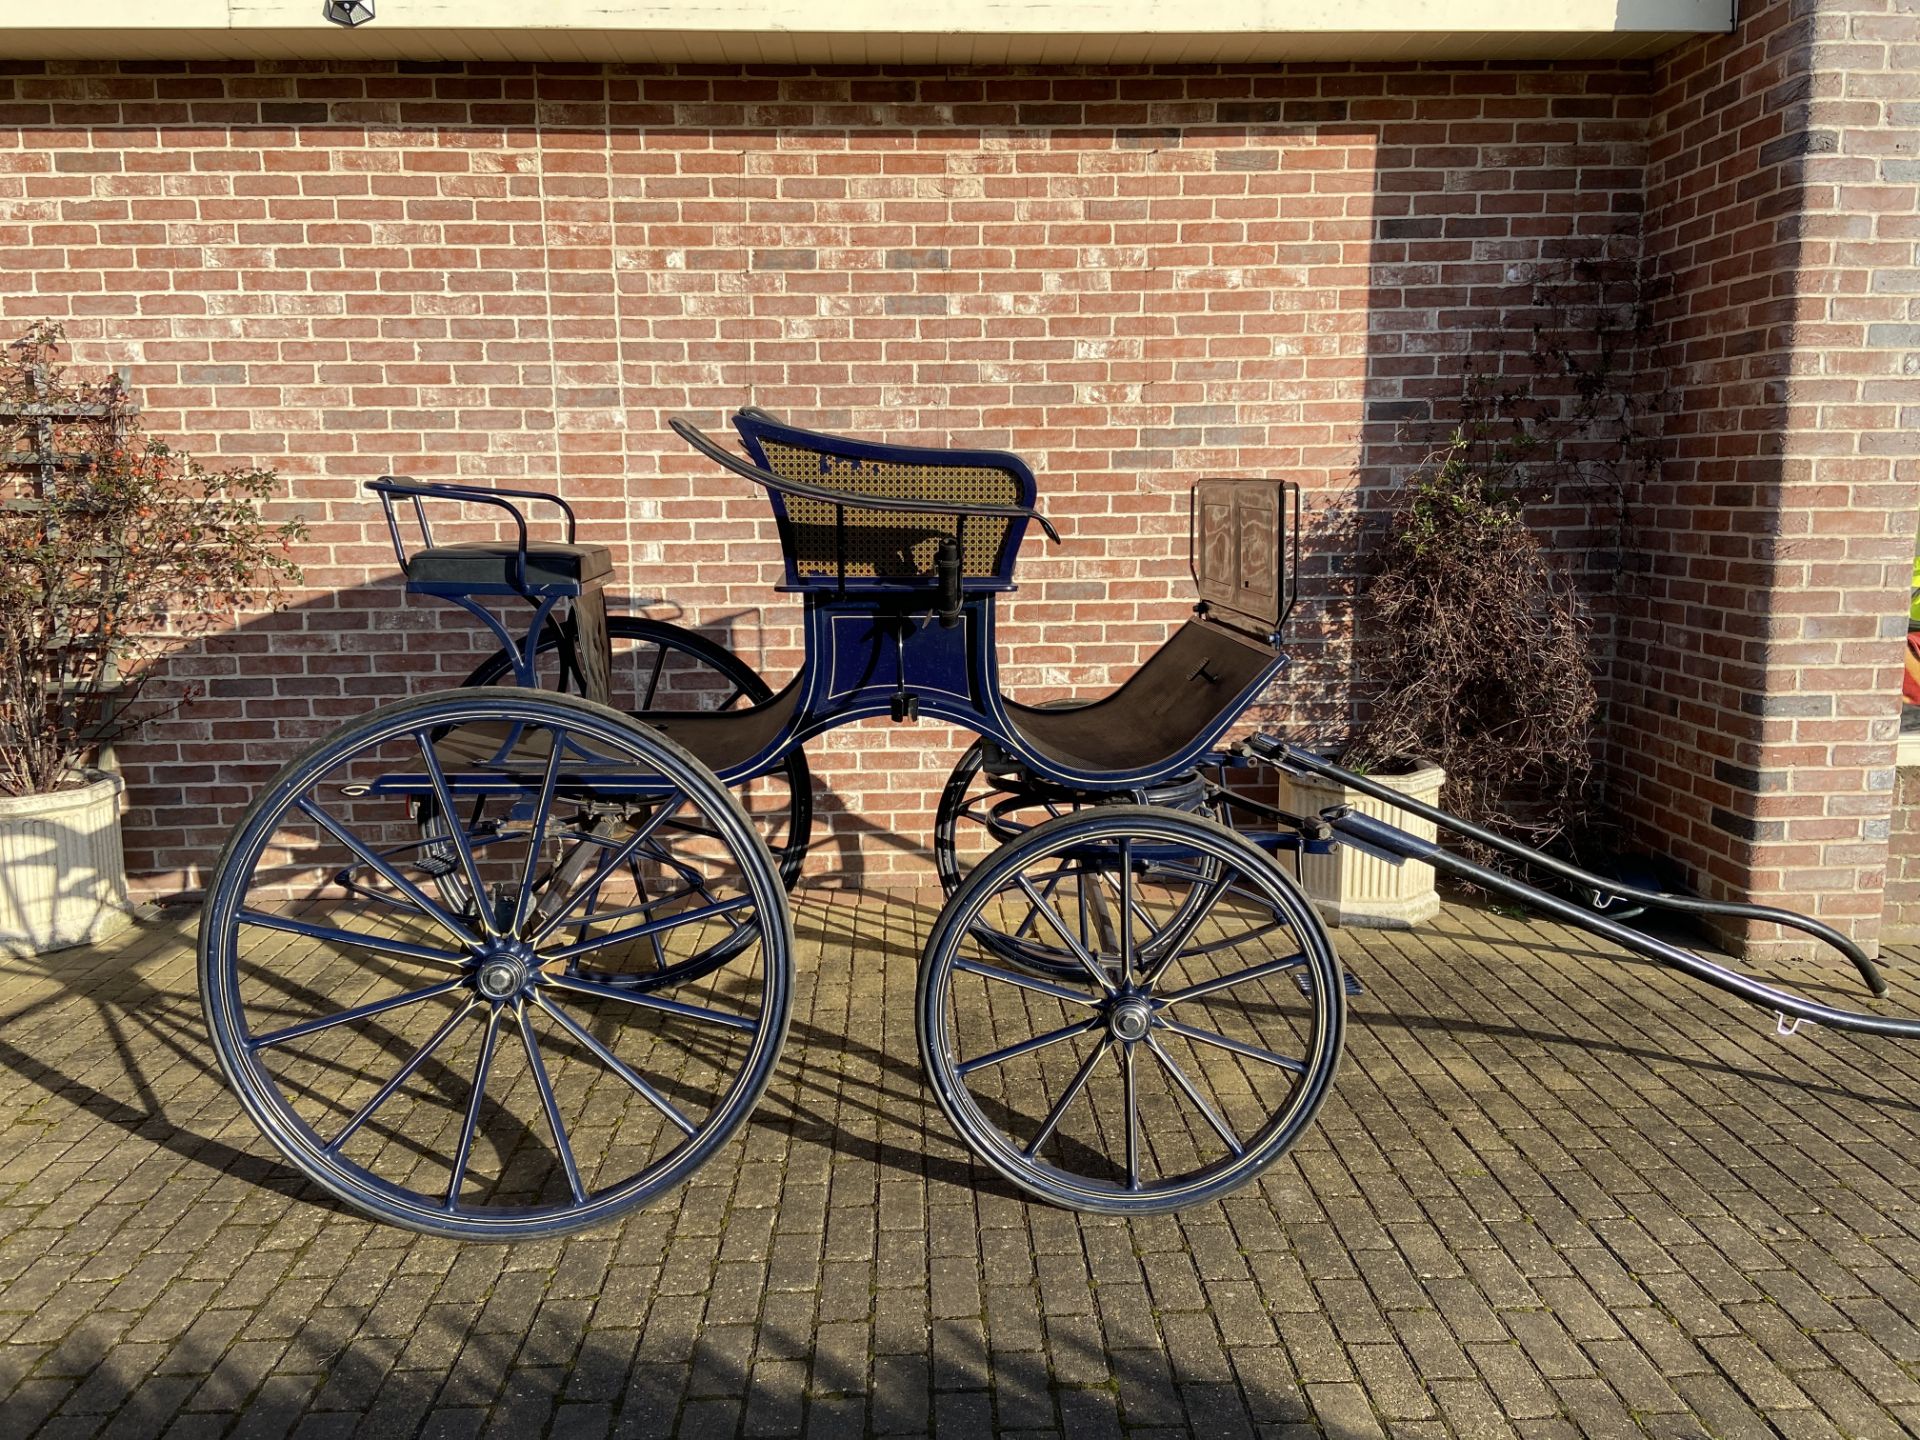 SPIDER PHAETON to suit 15 to 16hh. Painted navy blue lined with cream and gold, and